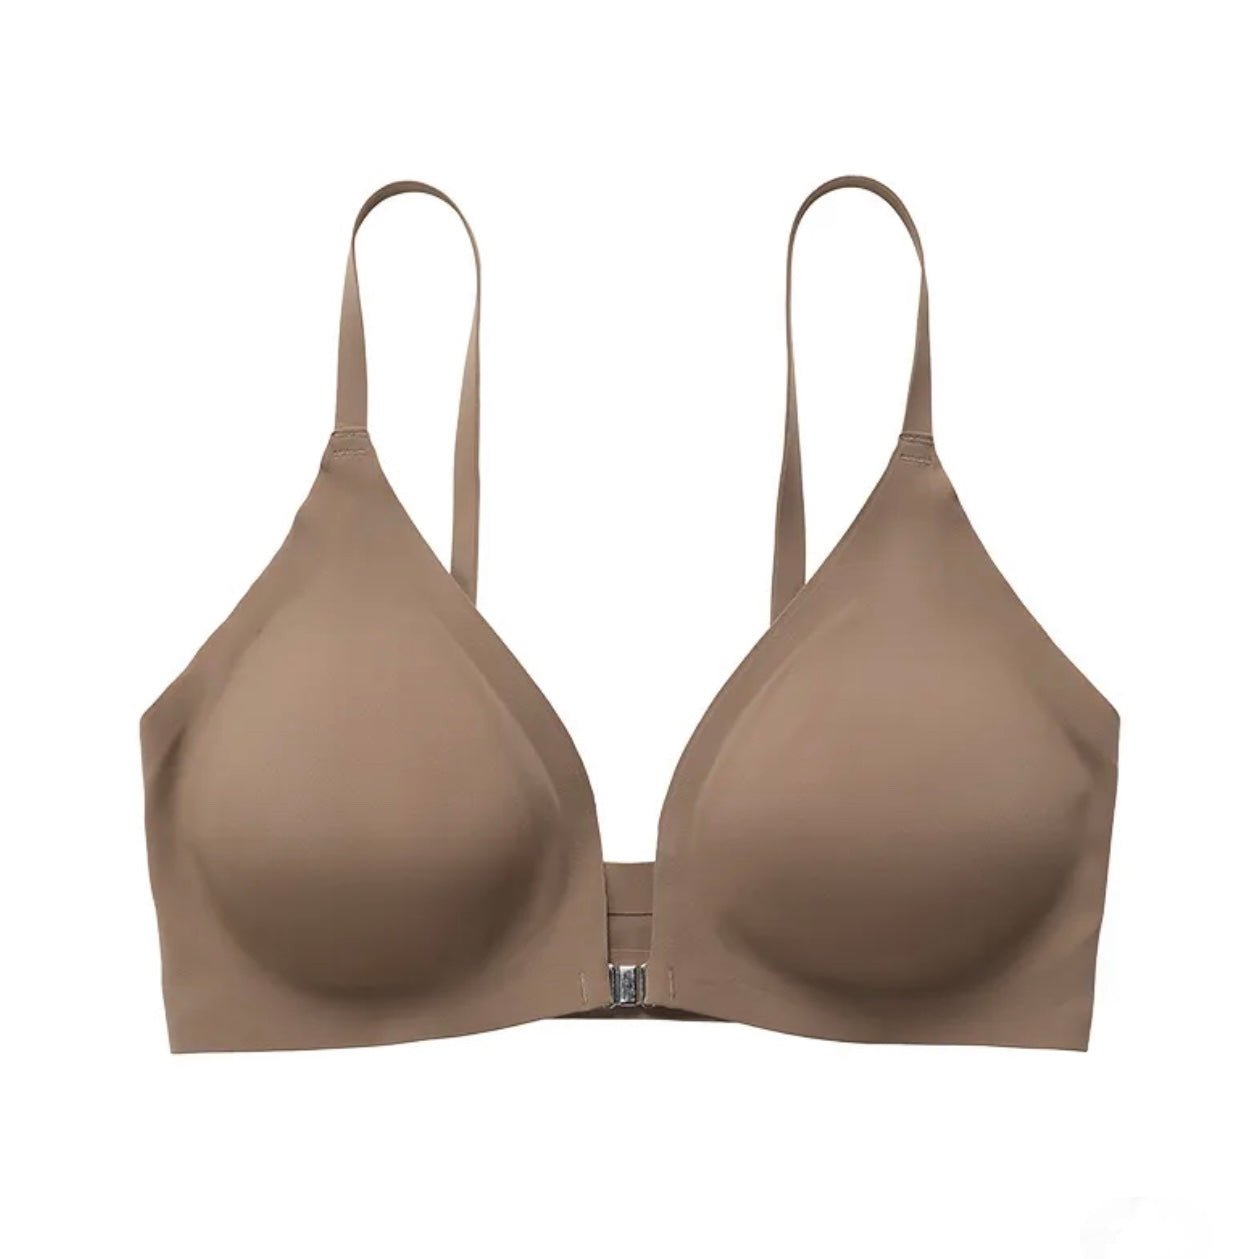 About the Bra - Skins Front Closure Bra - More Colors - About the Bra